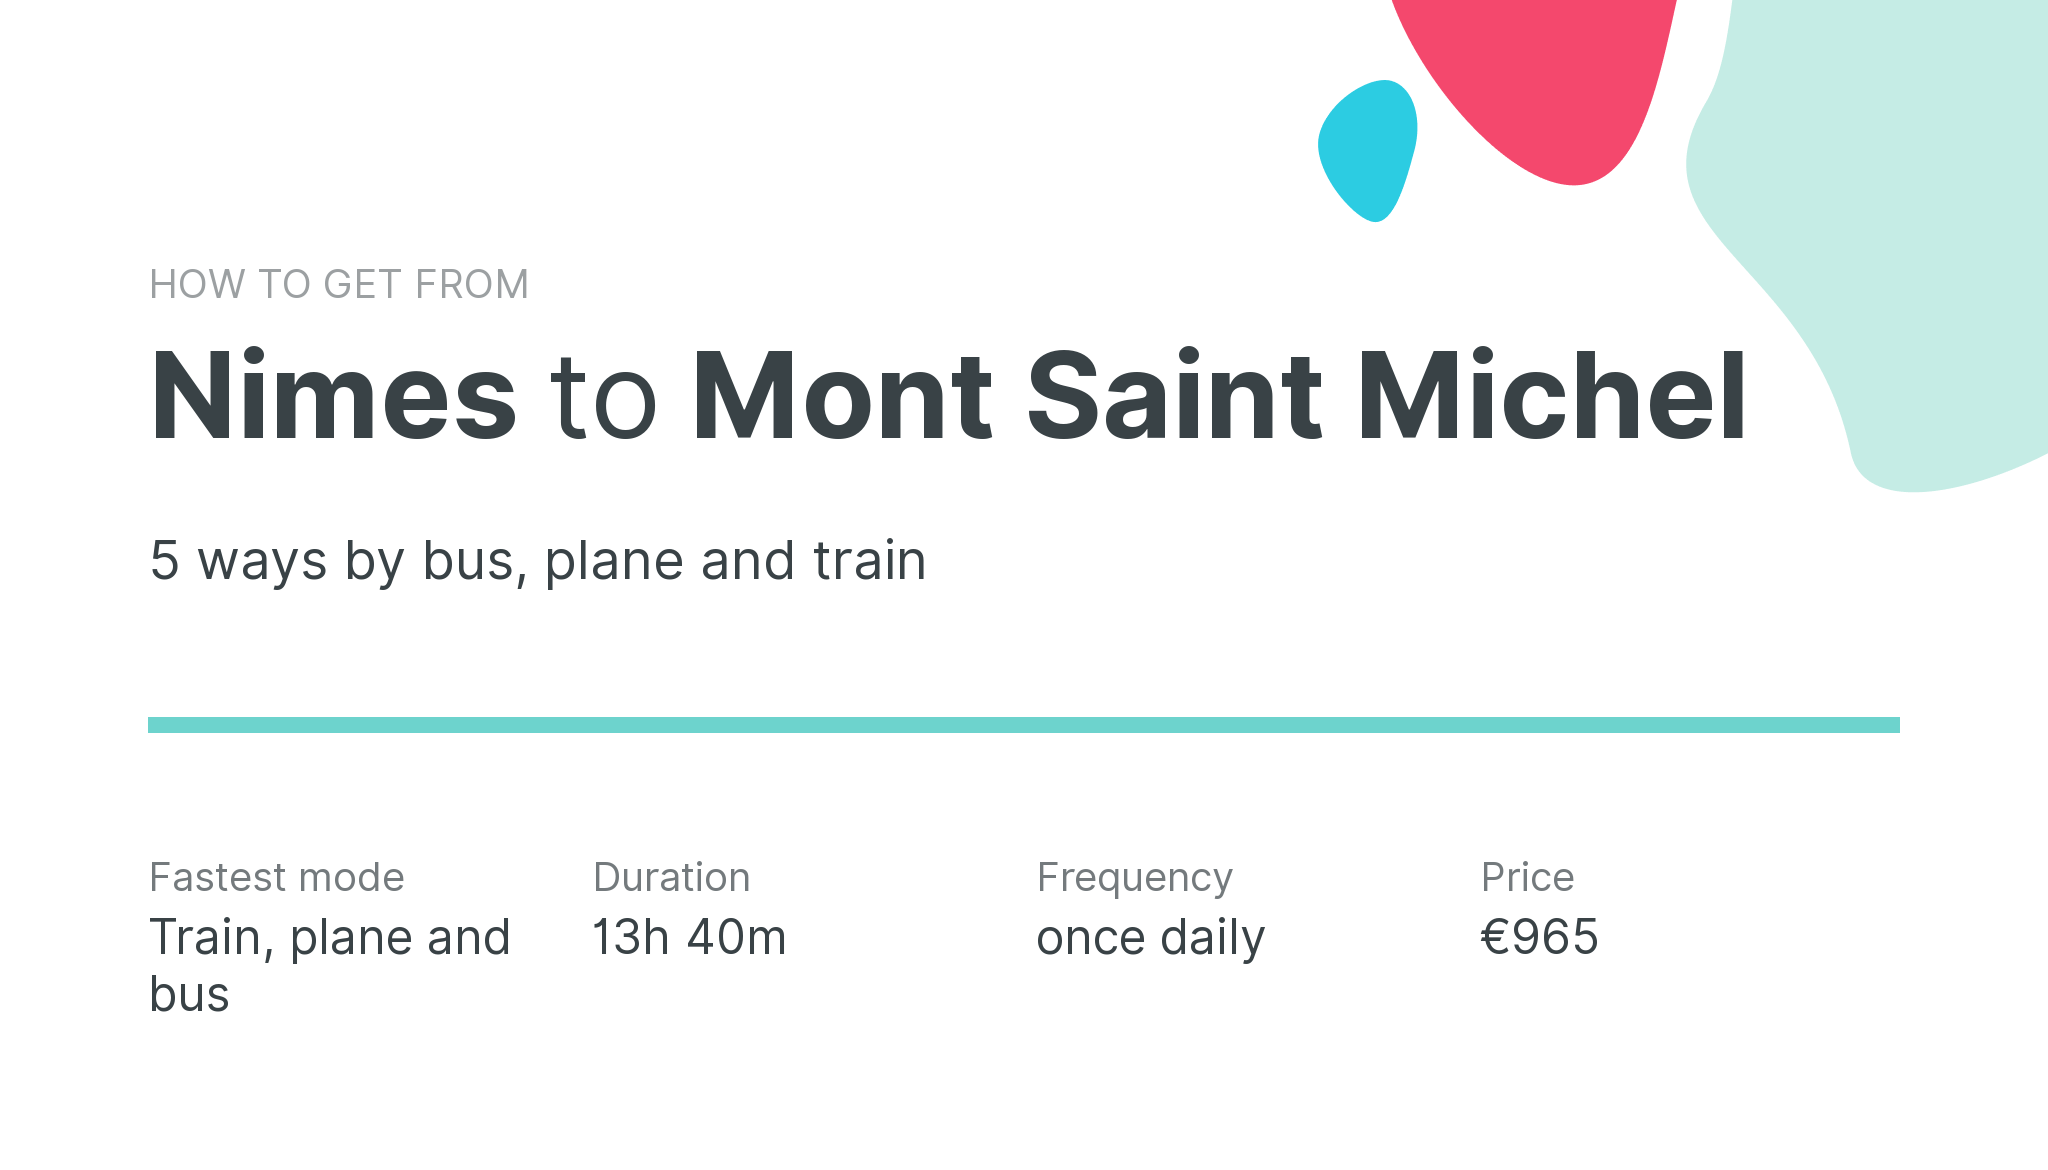 How do I get from Nimes to Mont Saint Michel